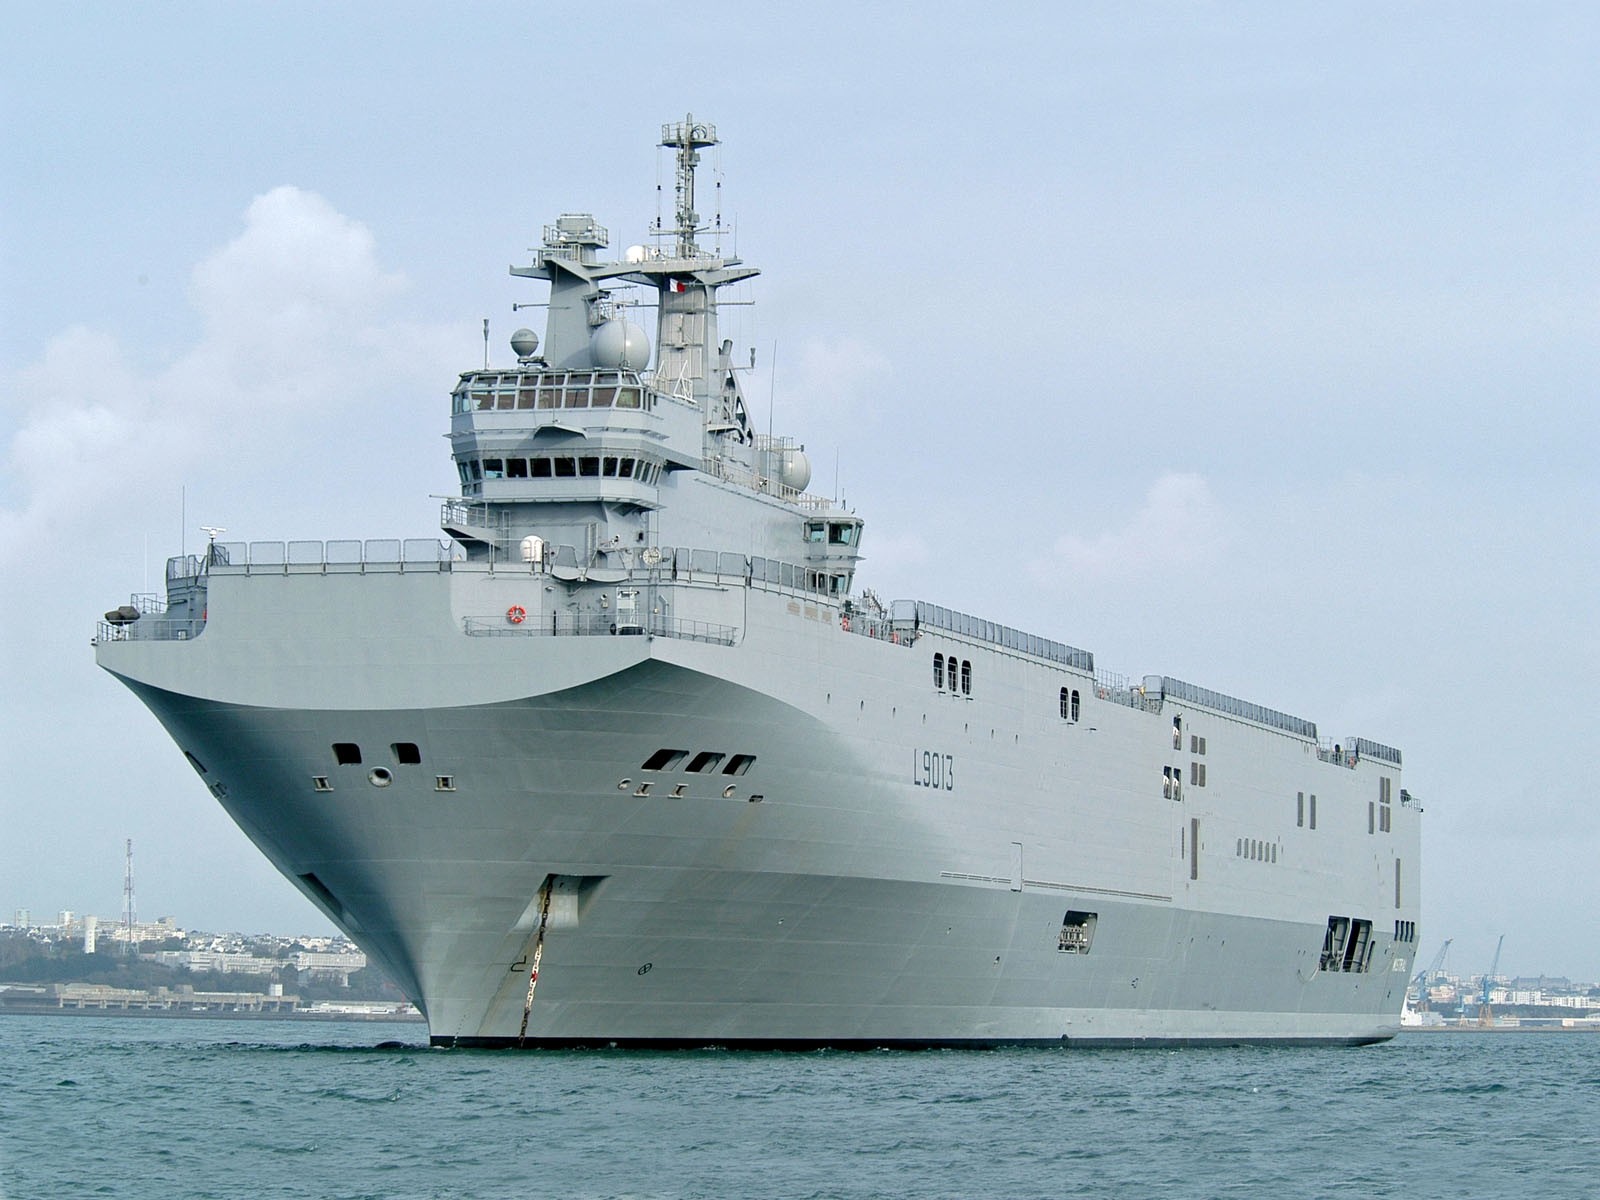 warship, Mistral, French navy Wallpaper